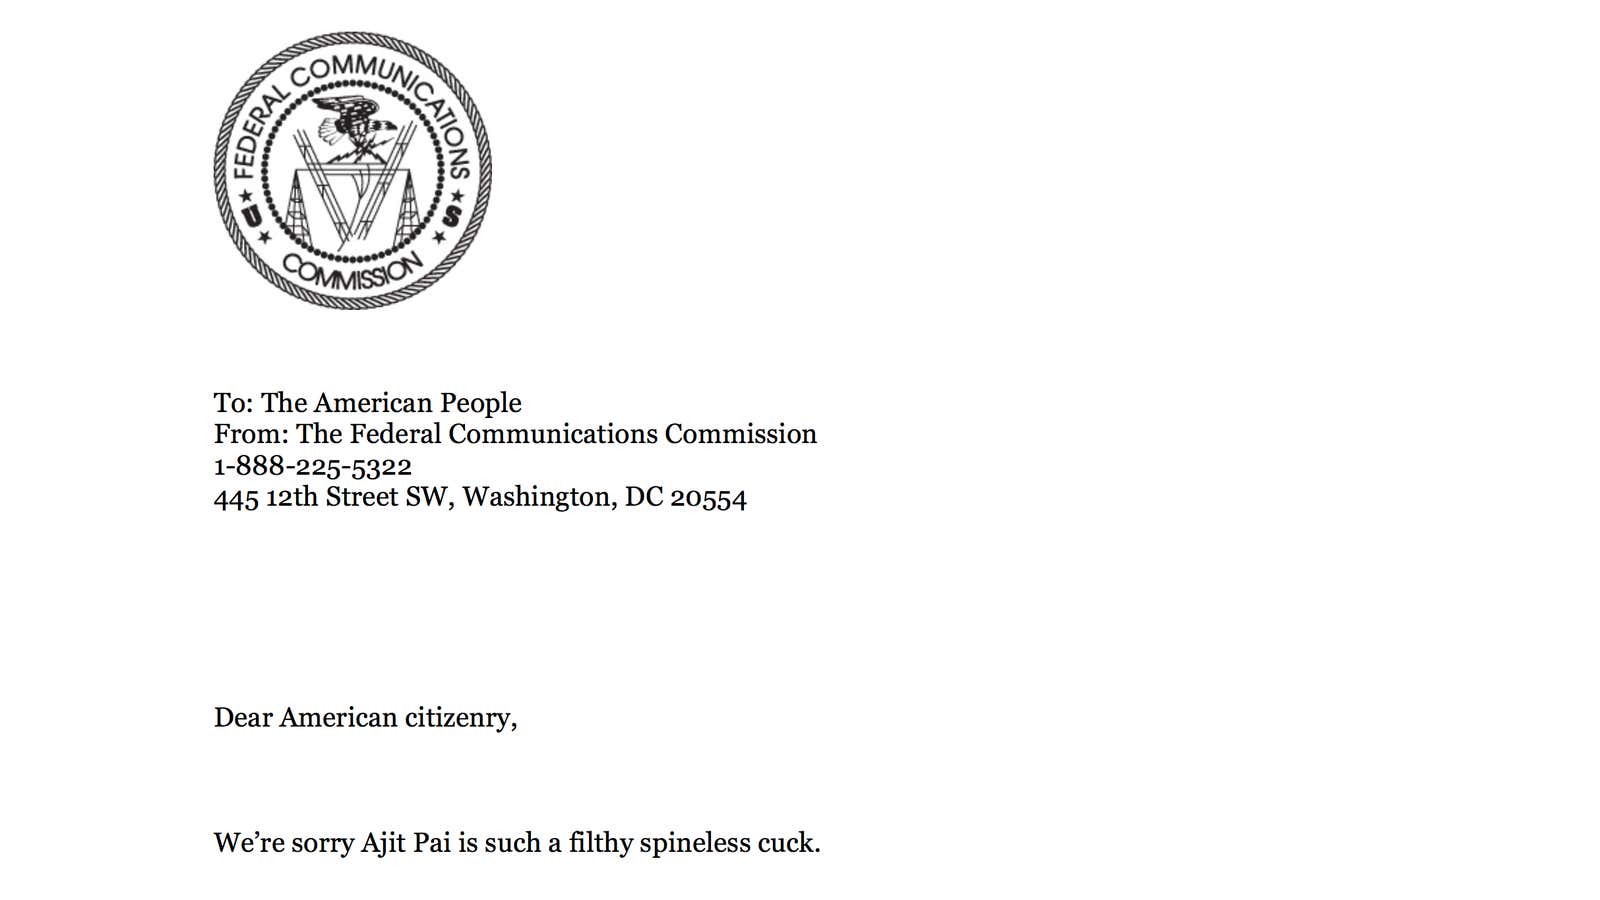 People are uploading memes and fake documents to the FCC website using API keys the agency gave out